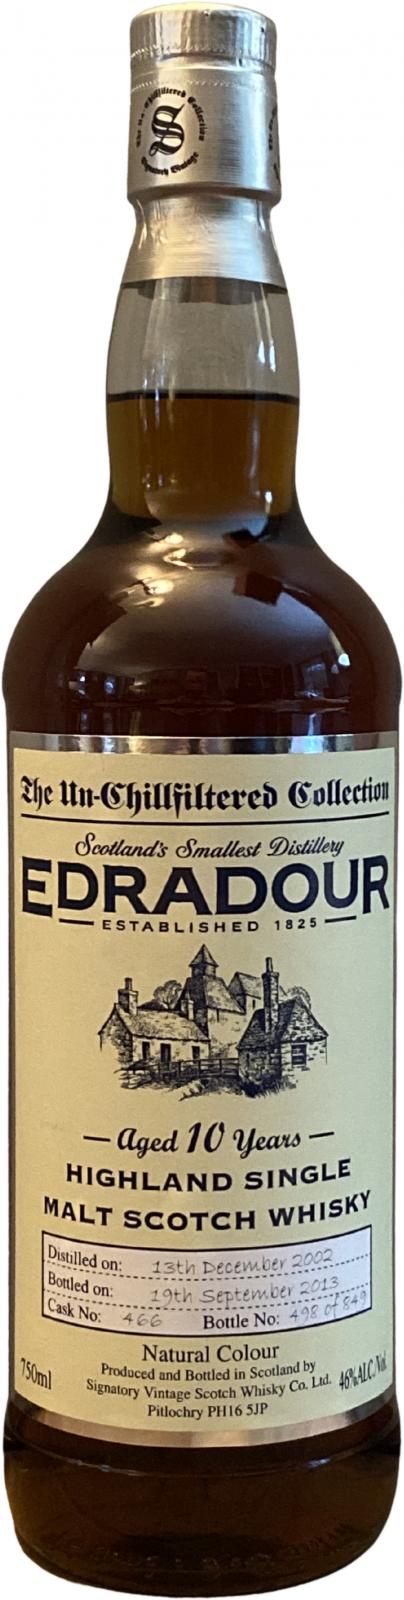 Edradour 2002 SV The Un-Chillfiltered Collection 466 46% 750ml